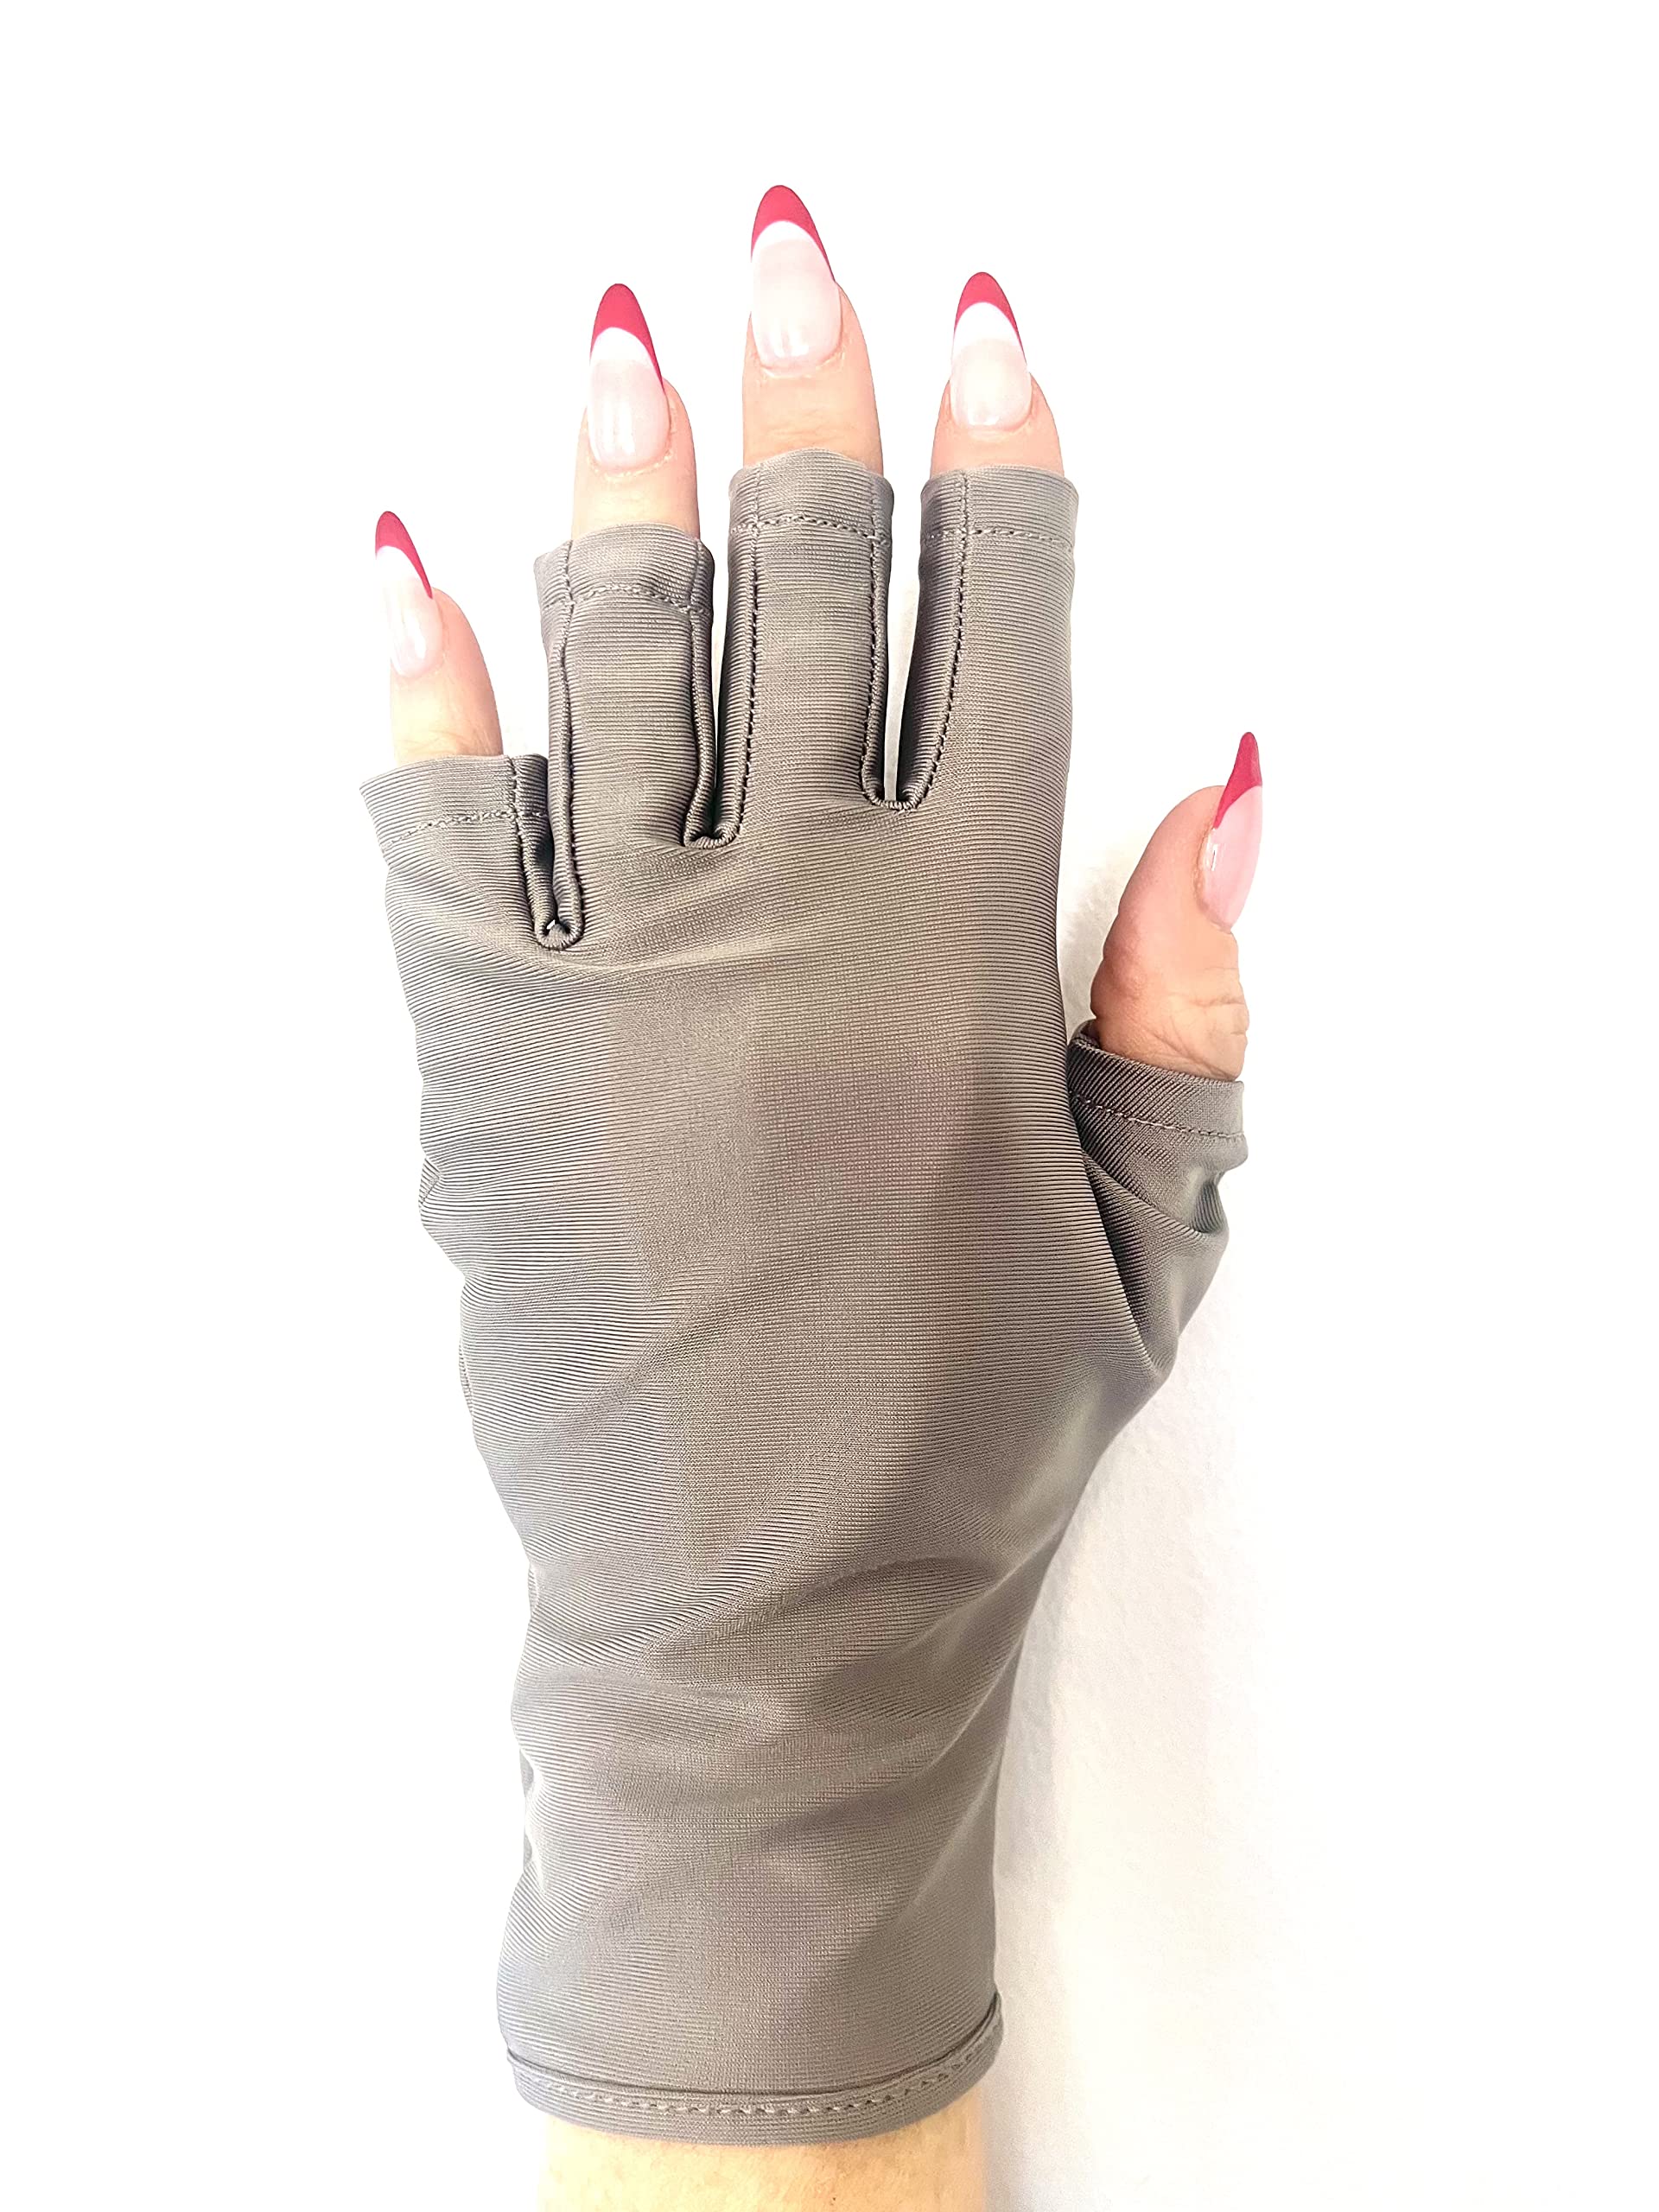 ManiGlovz -The ORIGINAL Anti UV/LED Gloves for Gel Manicures with Gel Lamp  Dryers, Driving, Fingerless